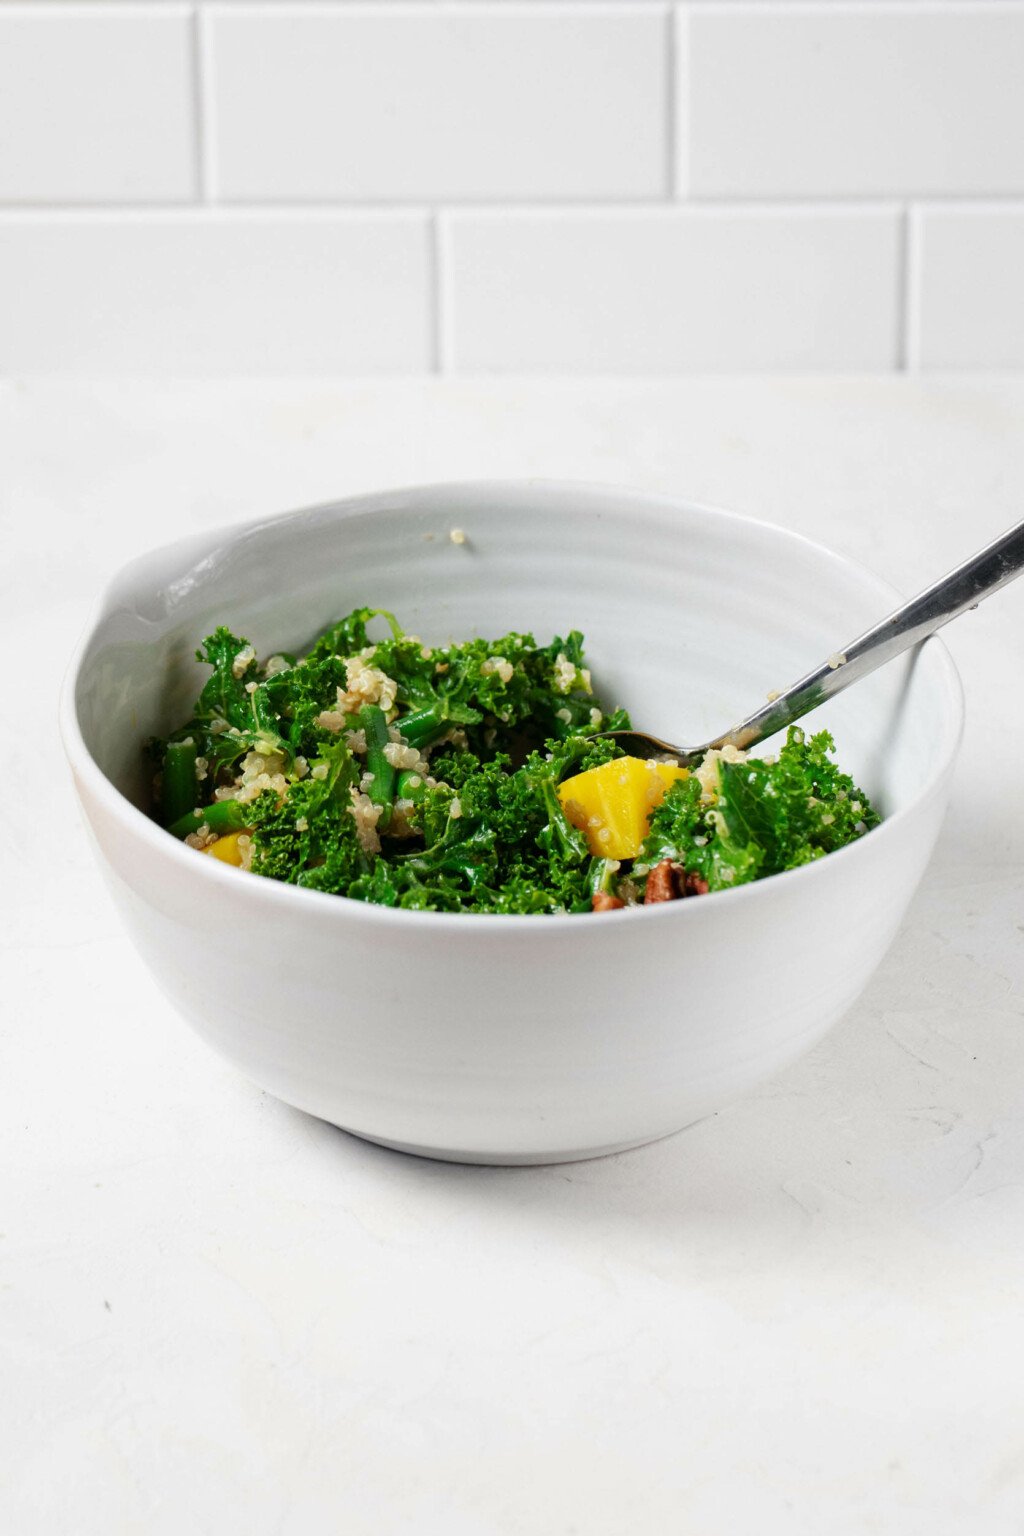 A large, white ceramic mixing bowl is being used to mix a bright green salad of kale, quinoa, and golden beets.